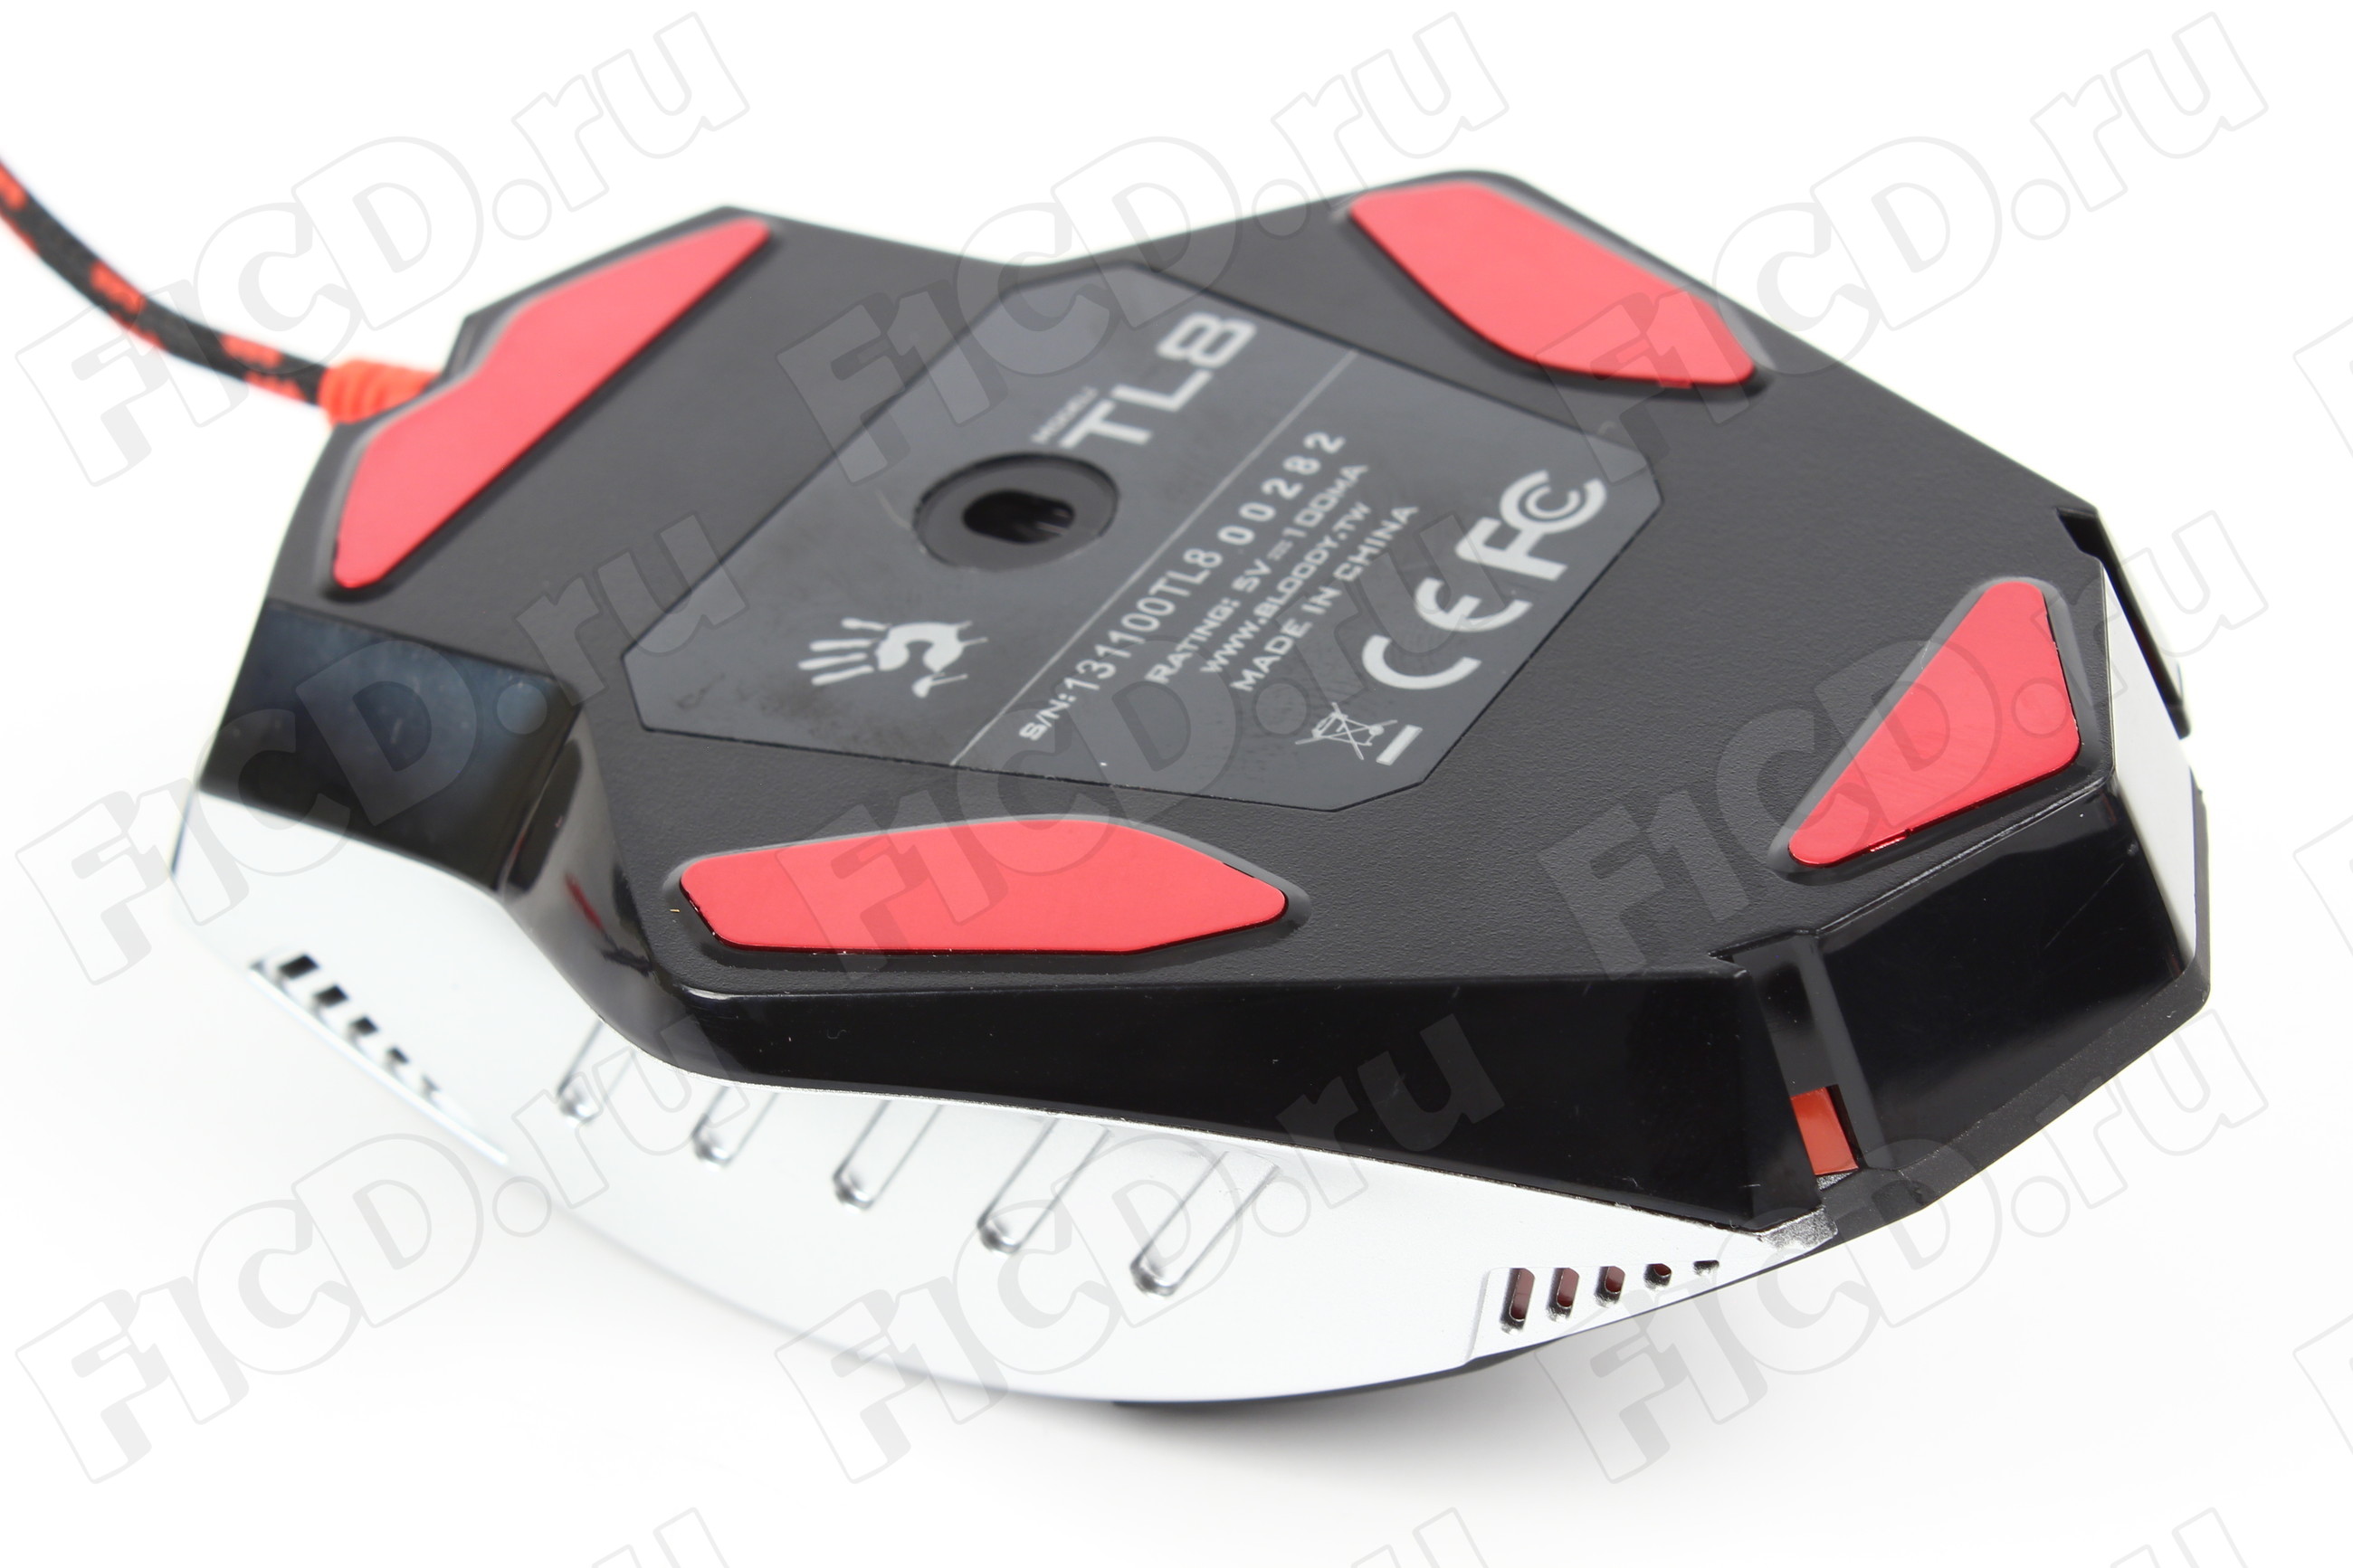 Eac blacklisted device bloody mouse a4tech rust фото 93